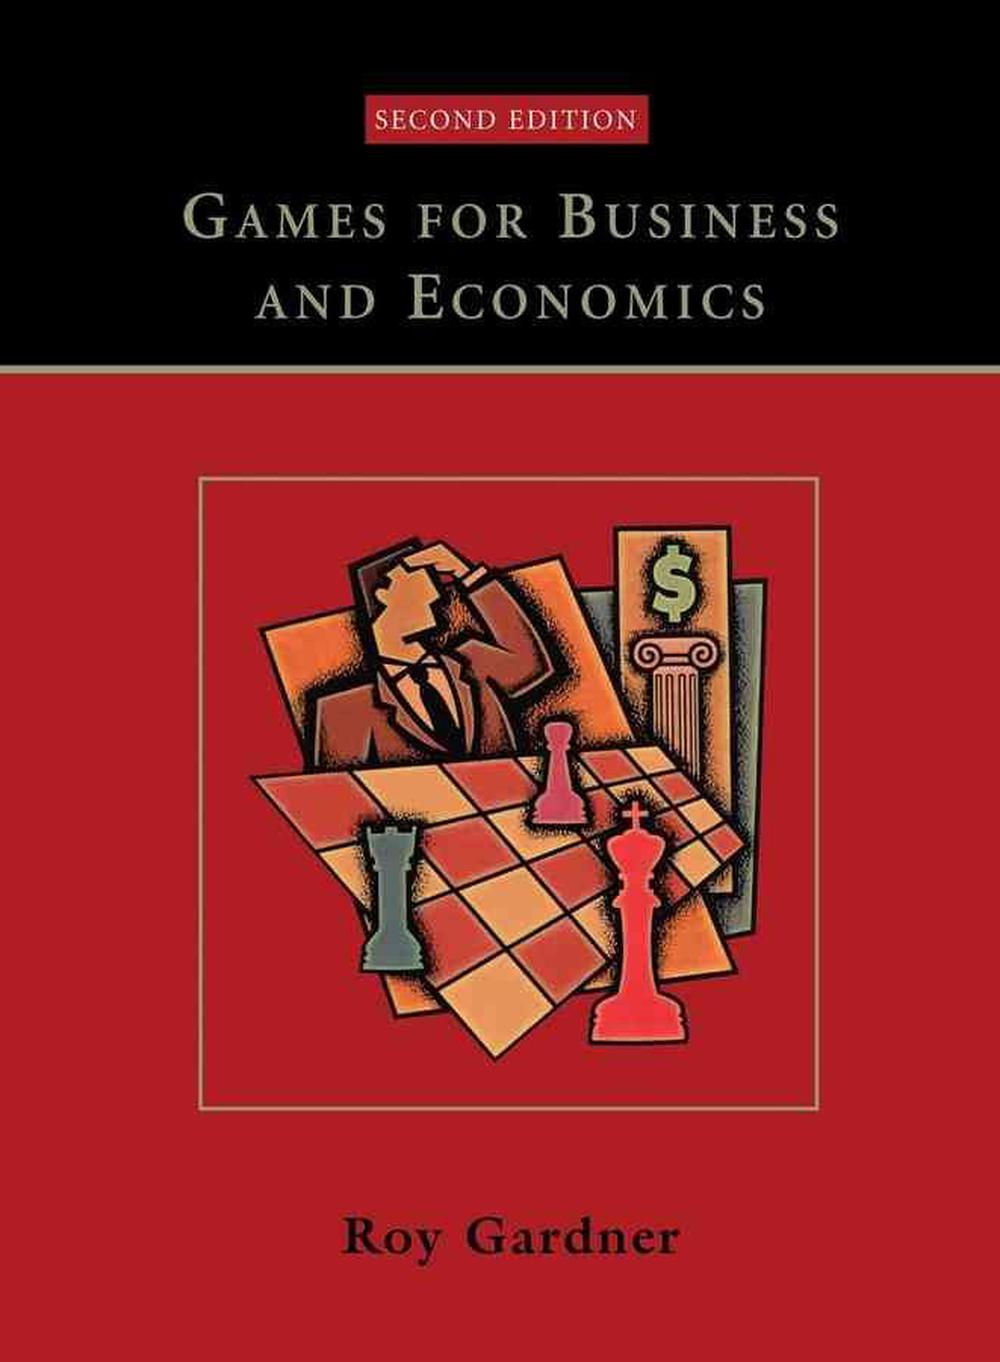 Games for Business and Economics by Roy Gardner (English) Paperback